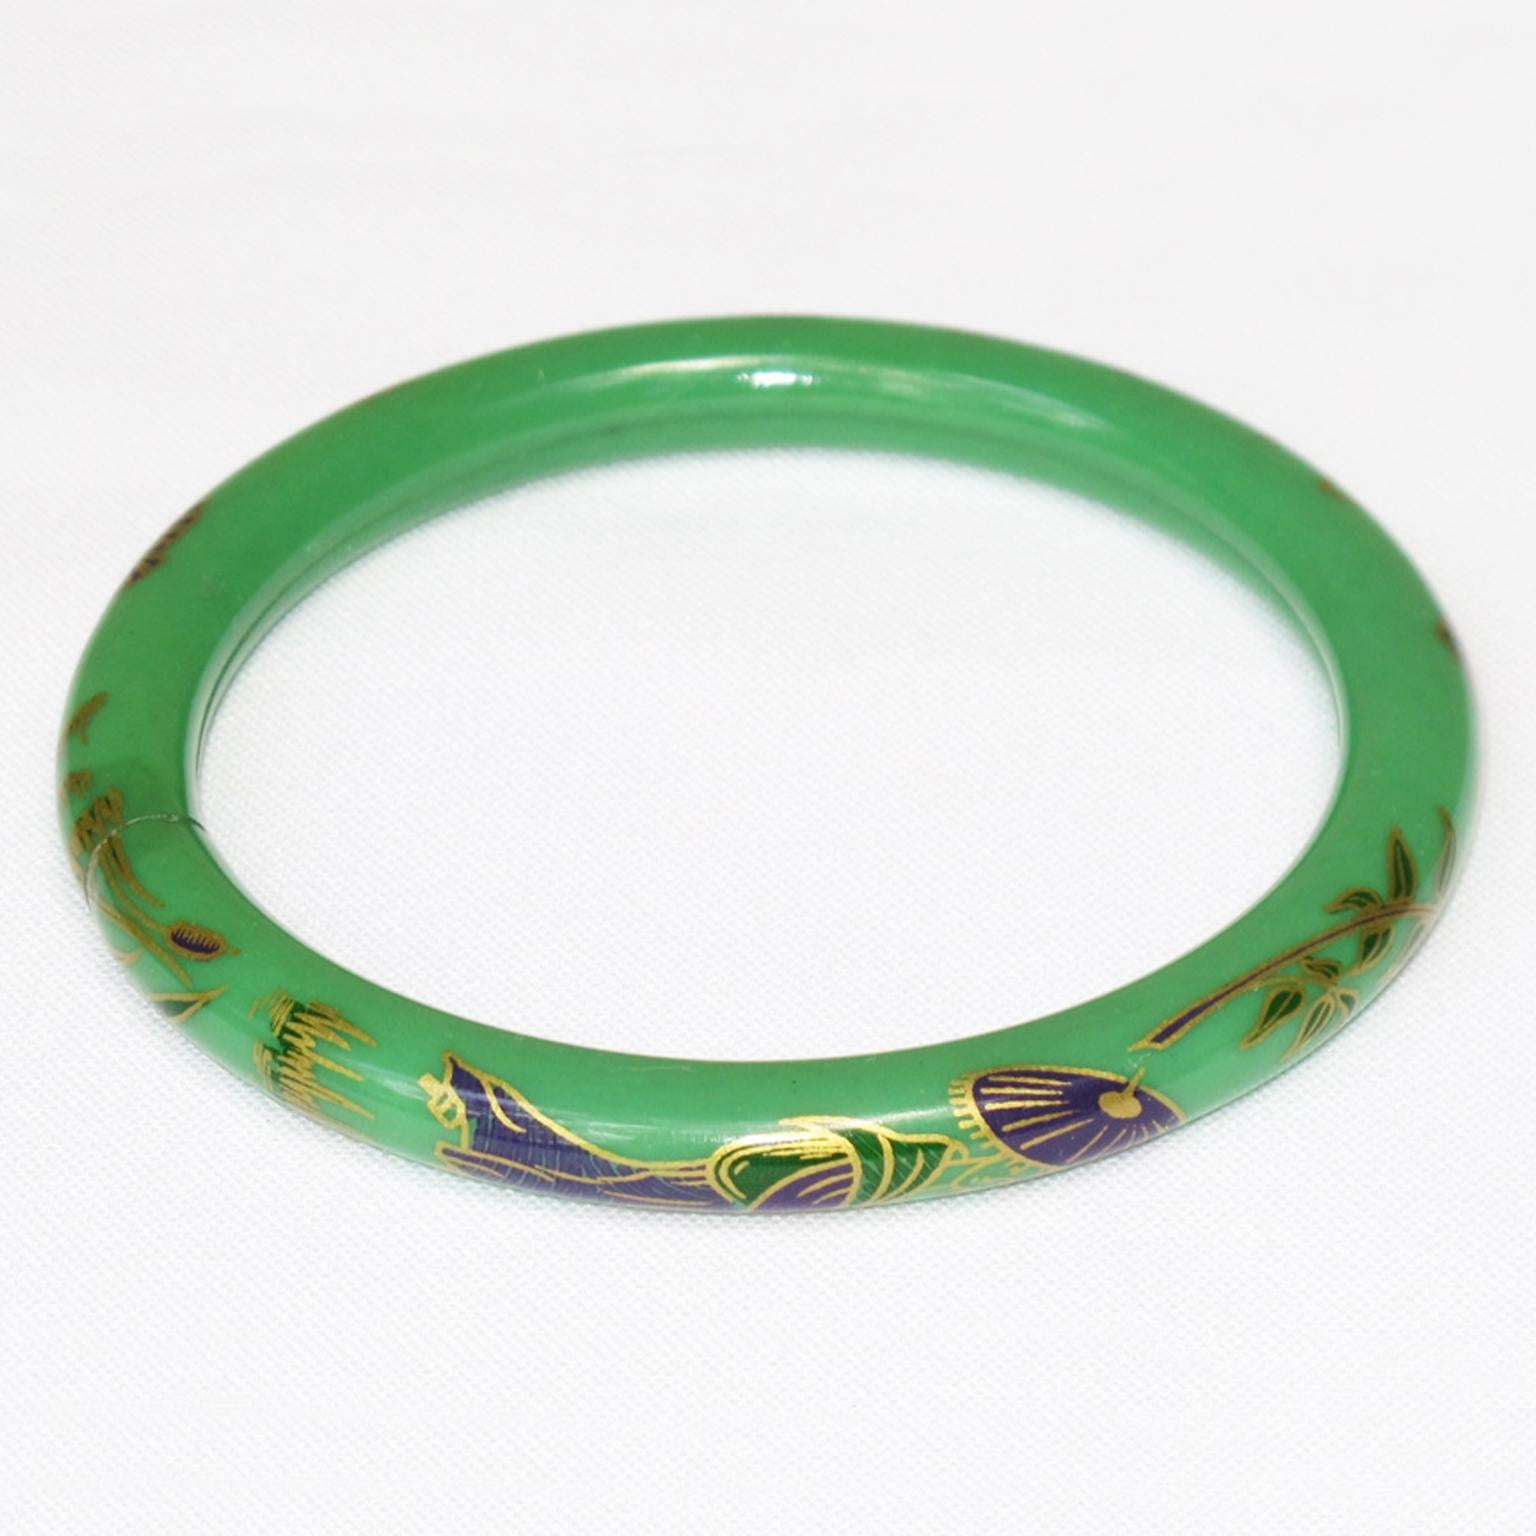 A cute 1920s French Art Deco celluloid bracelet bangle. It features a light hollow tube shape with an Asian-inspired Japanese design around the bracelet. 
The hollow bracelet technique is an ancient technique applied to jewelry at the turn of the